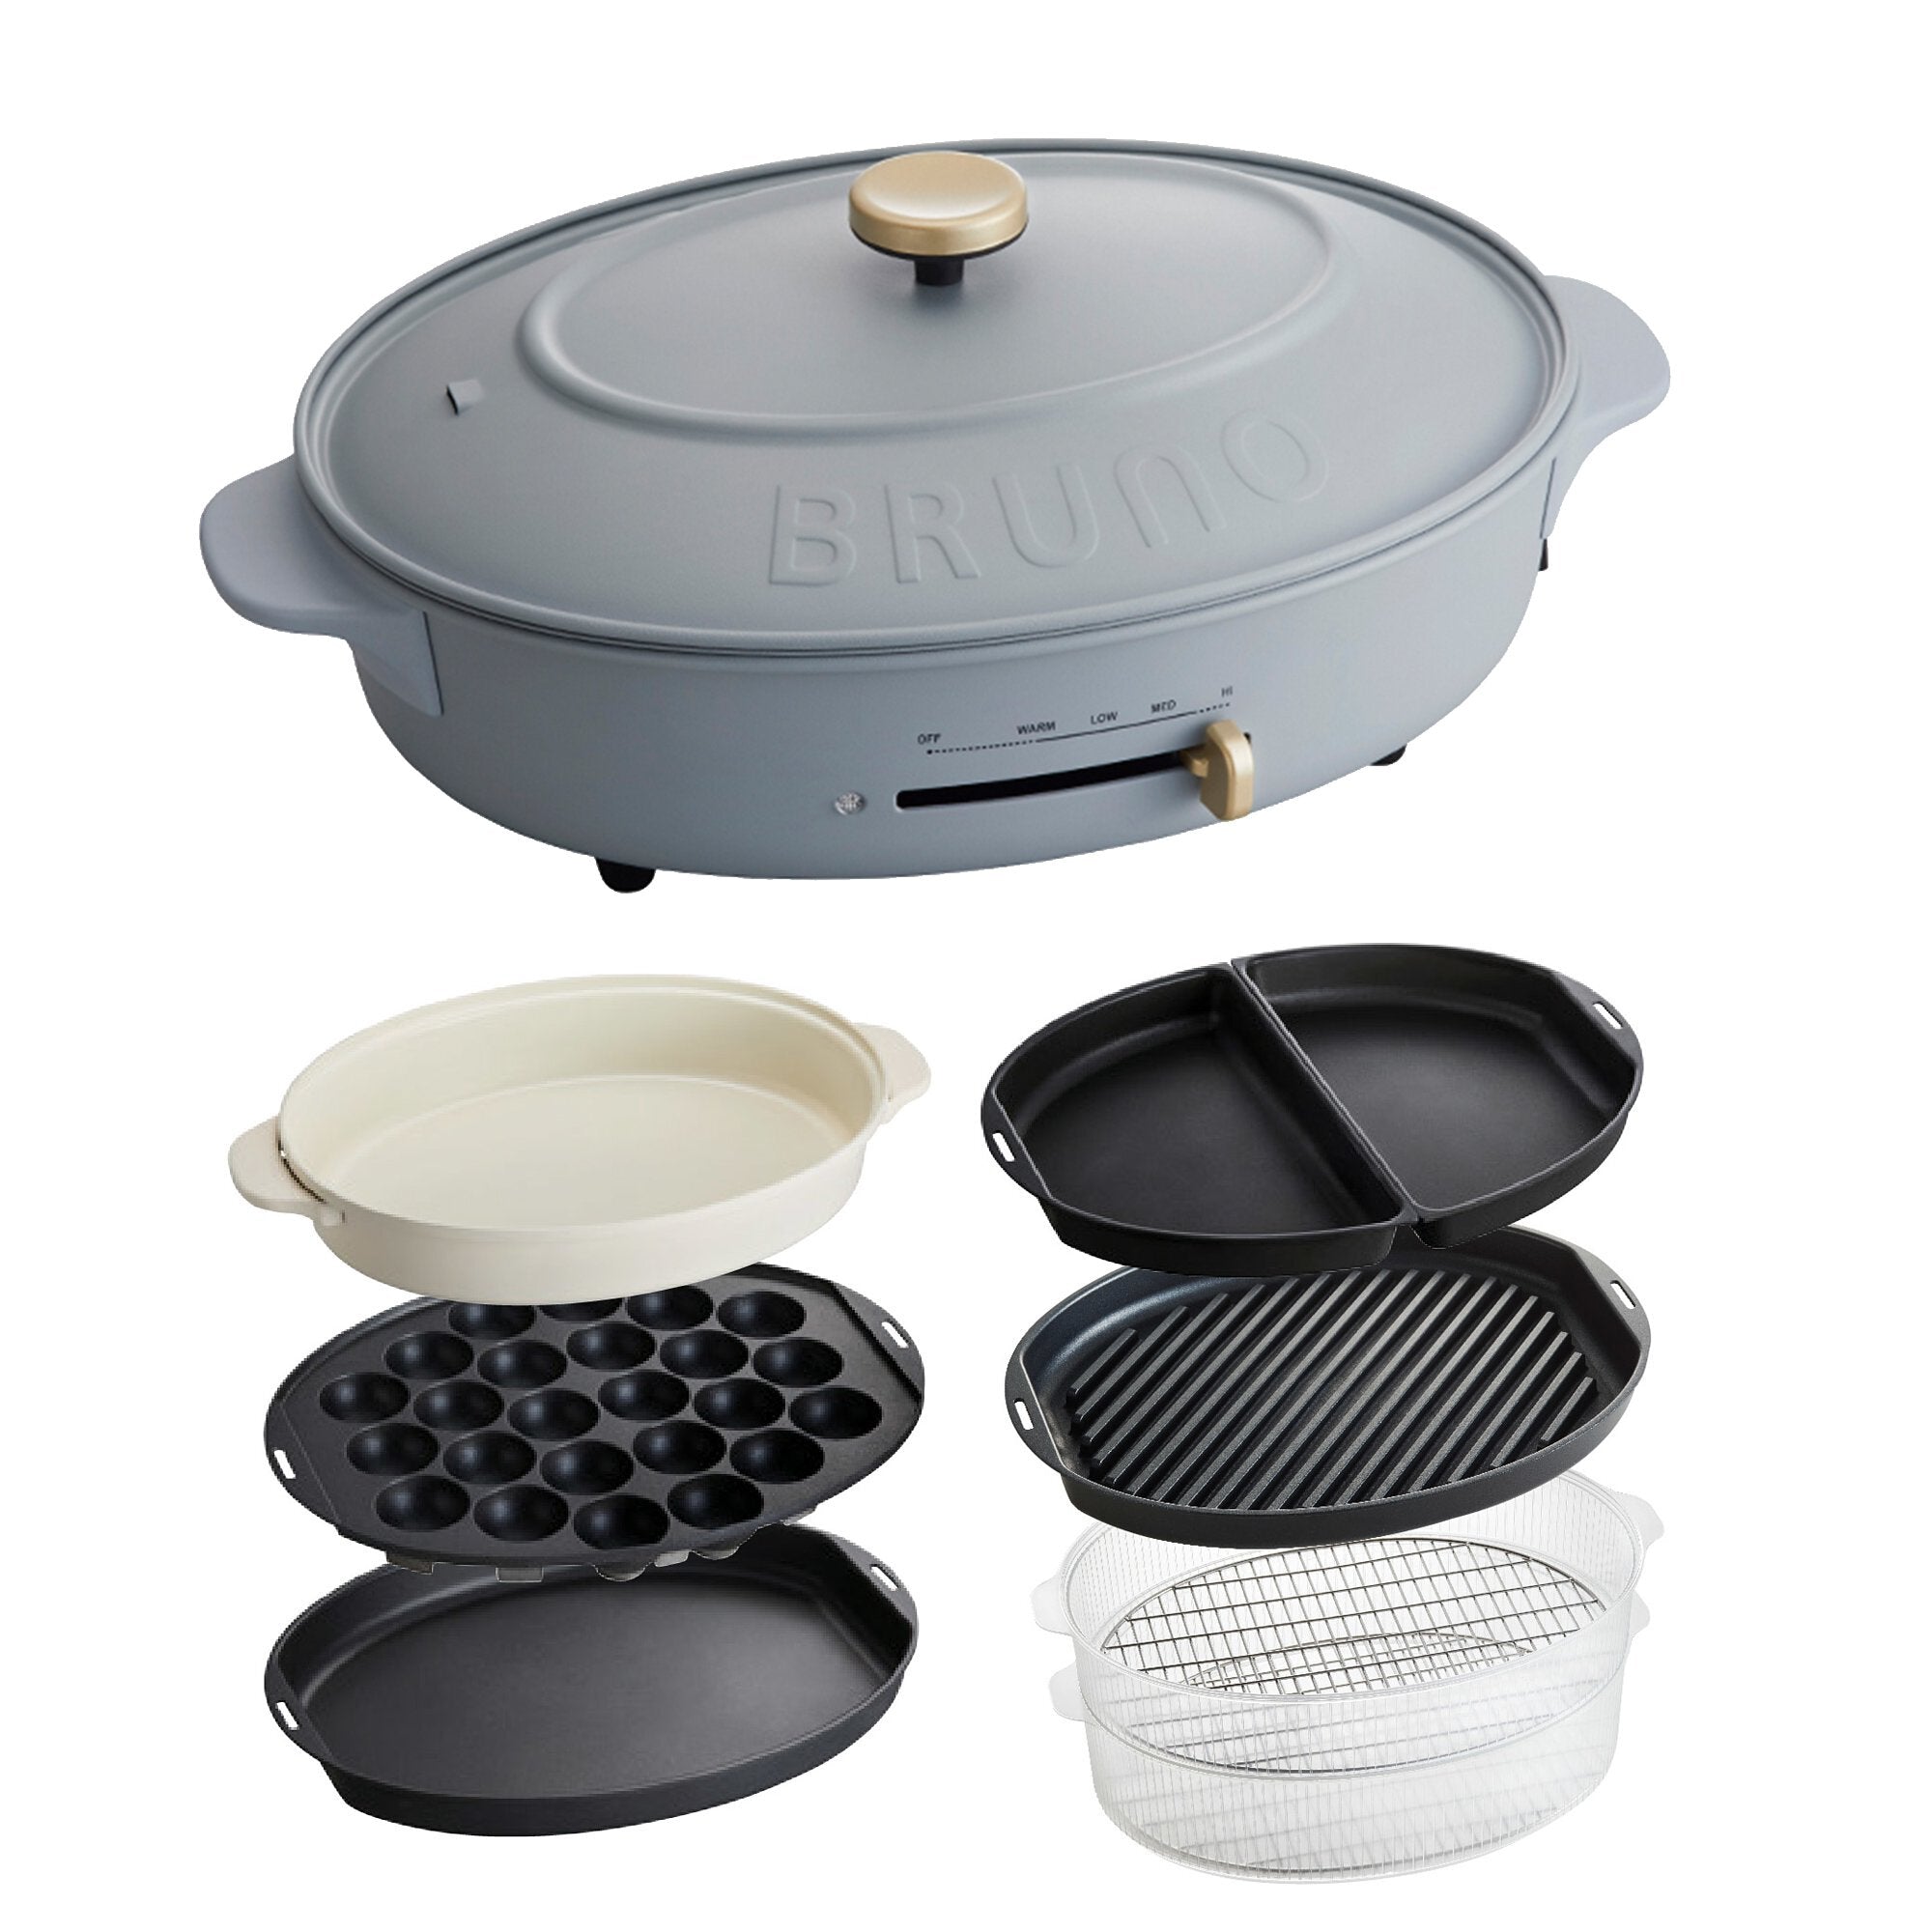 BRUNO Oval Hot Plate Set (Blue Gray / Bundled with 6 Plates)